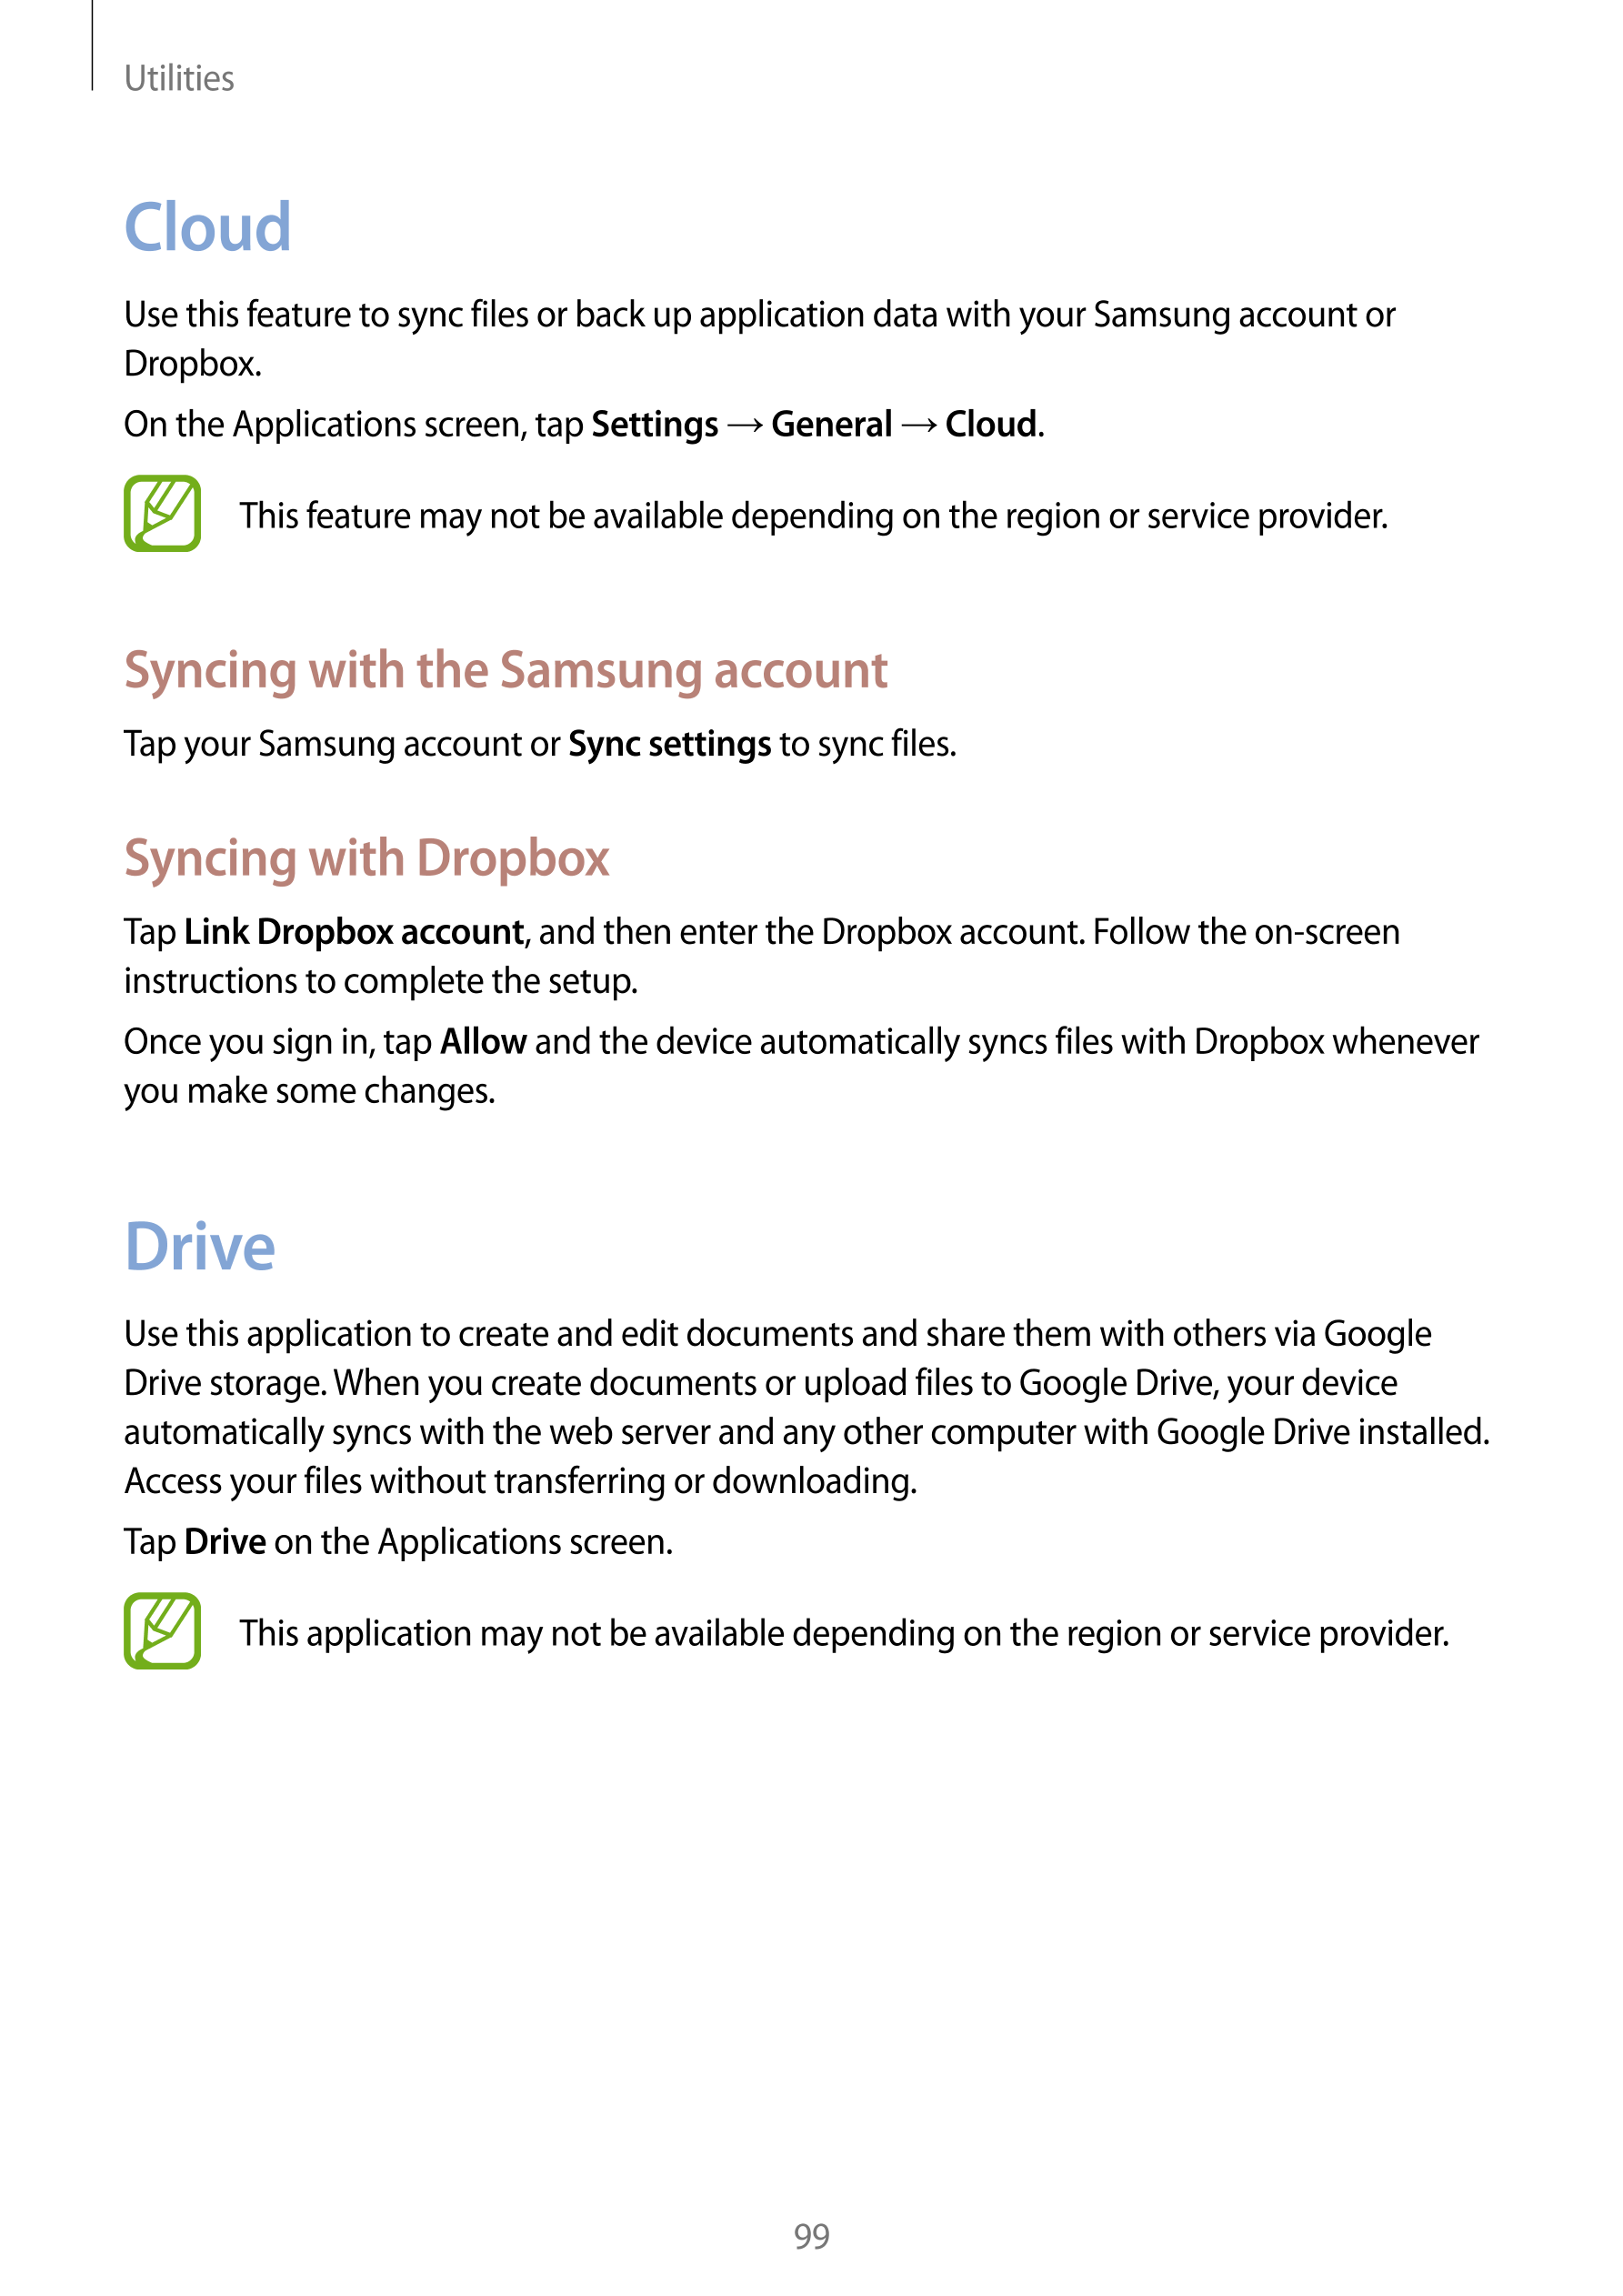 Utilities
Cloud
Use this feature to sync files or back up application data with your Samsung account or 
Dropbox.
On the Applica